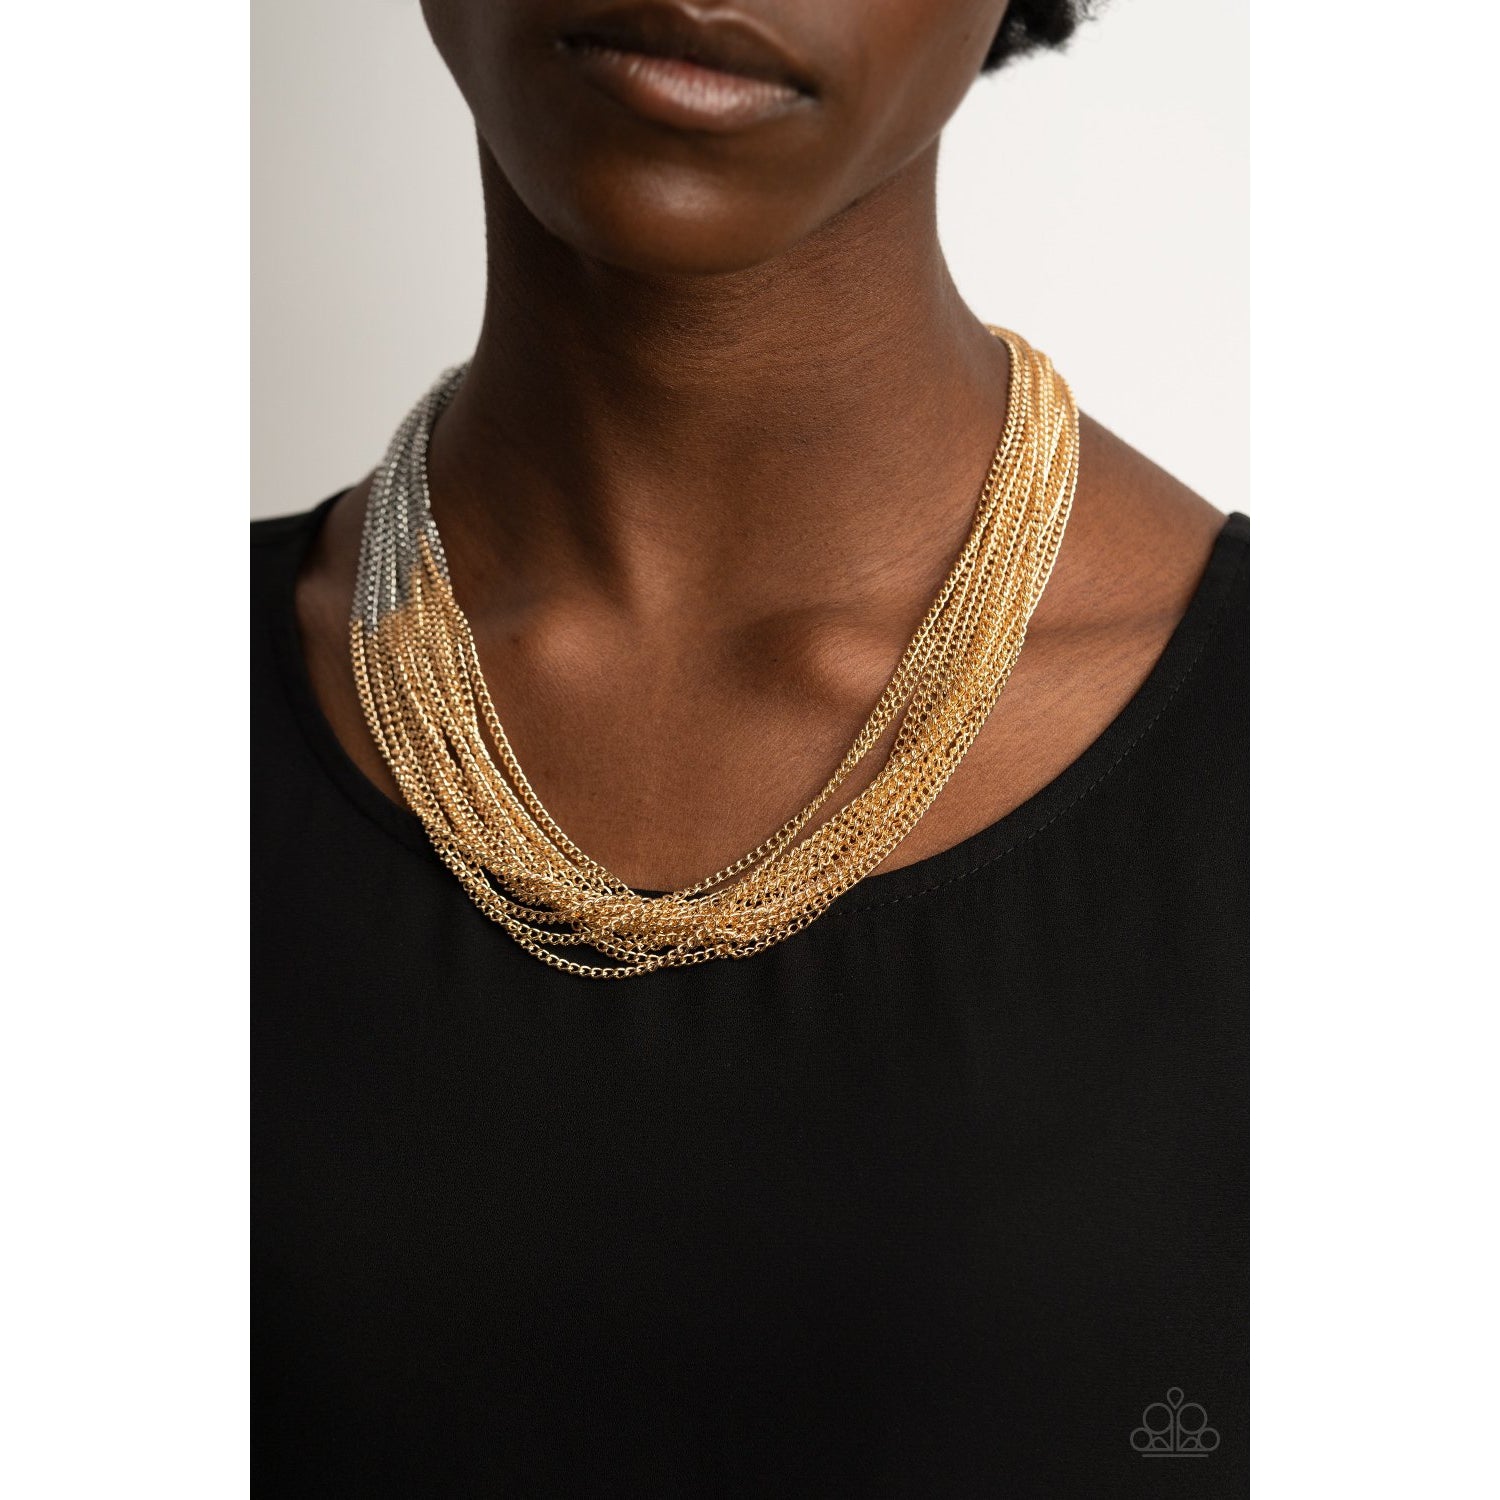 Metallic Merger - Gold and Silver Necklace - Paparazzi Accessories - GlaMarous Titi Jewels